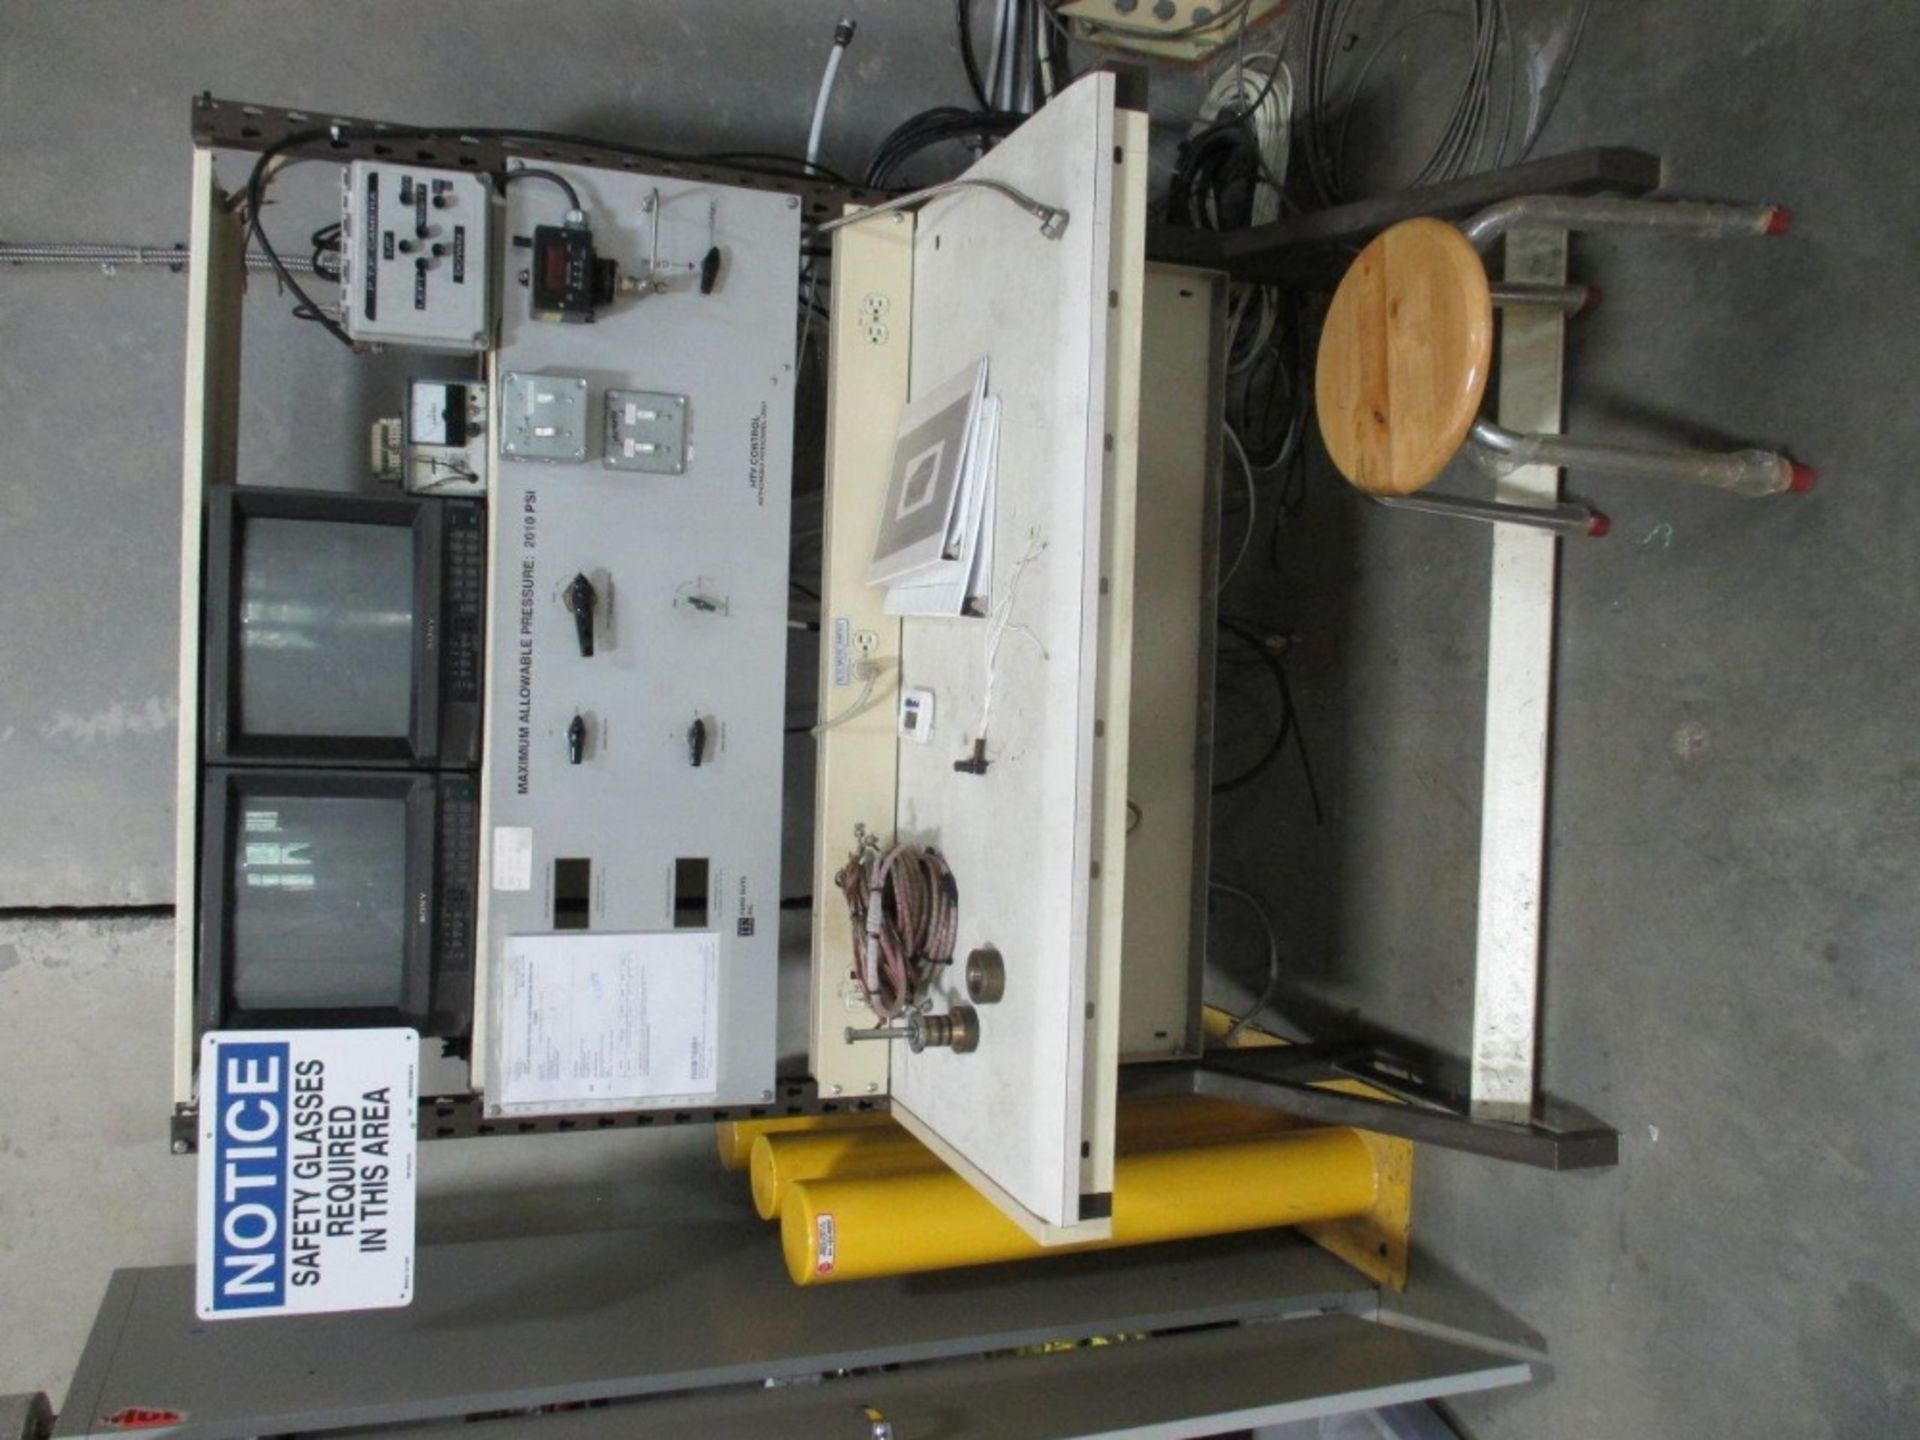 HTV System & 10ton Gantry Crane Including Controls, and parts cabinet - Image 9 of 10